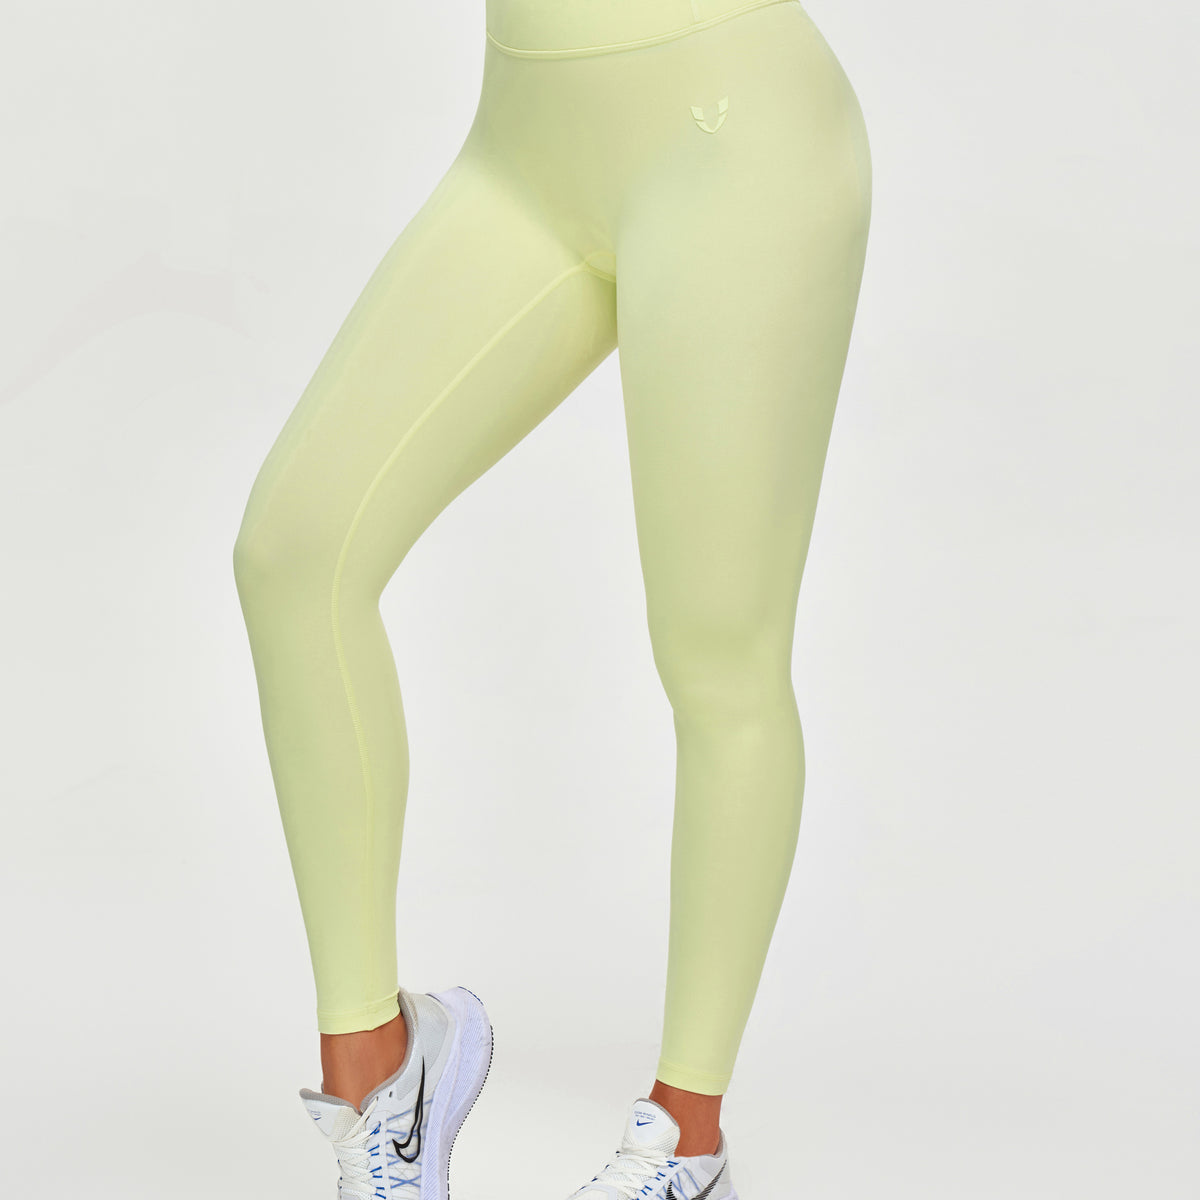 Gym Leggings for Women ZIP IT! Black-Fluo Yellow E-store  -  Polish manufacturer of sportswear for fitness, Crossfit, gym, running.  Quick delivery and easy return and exchange